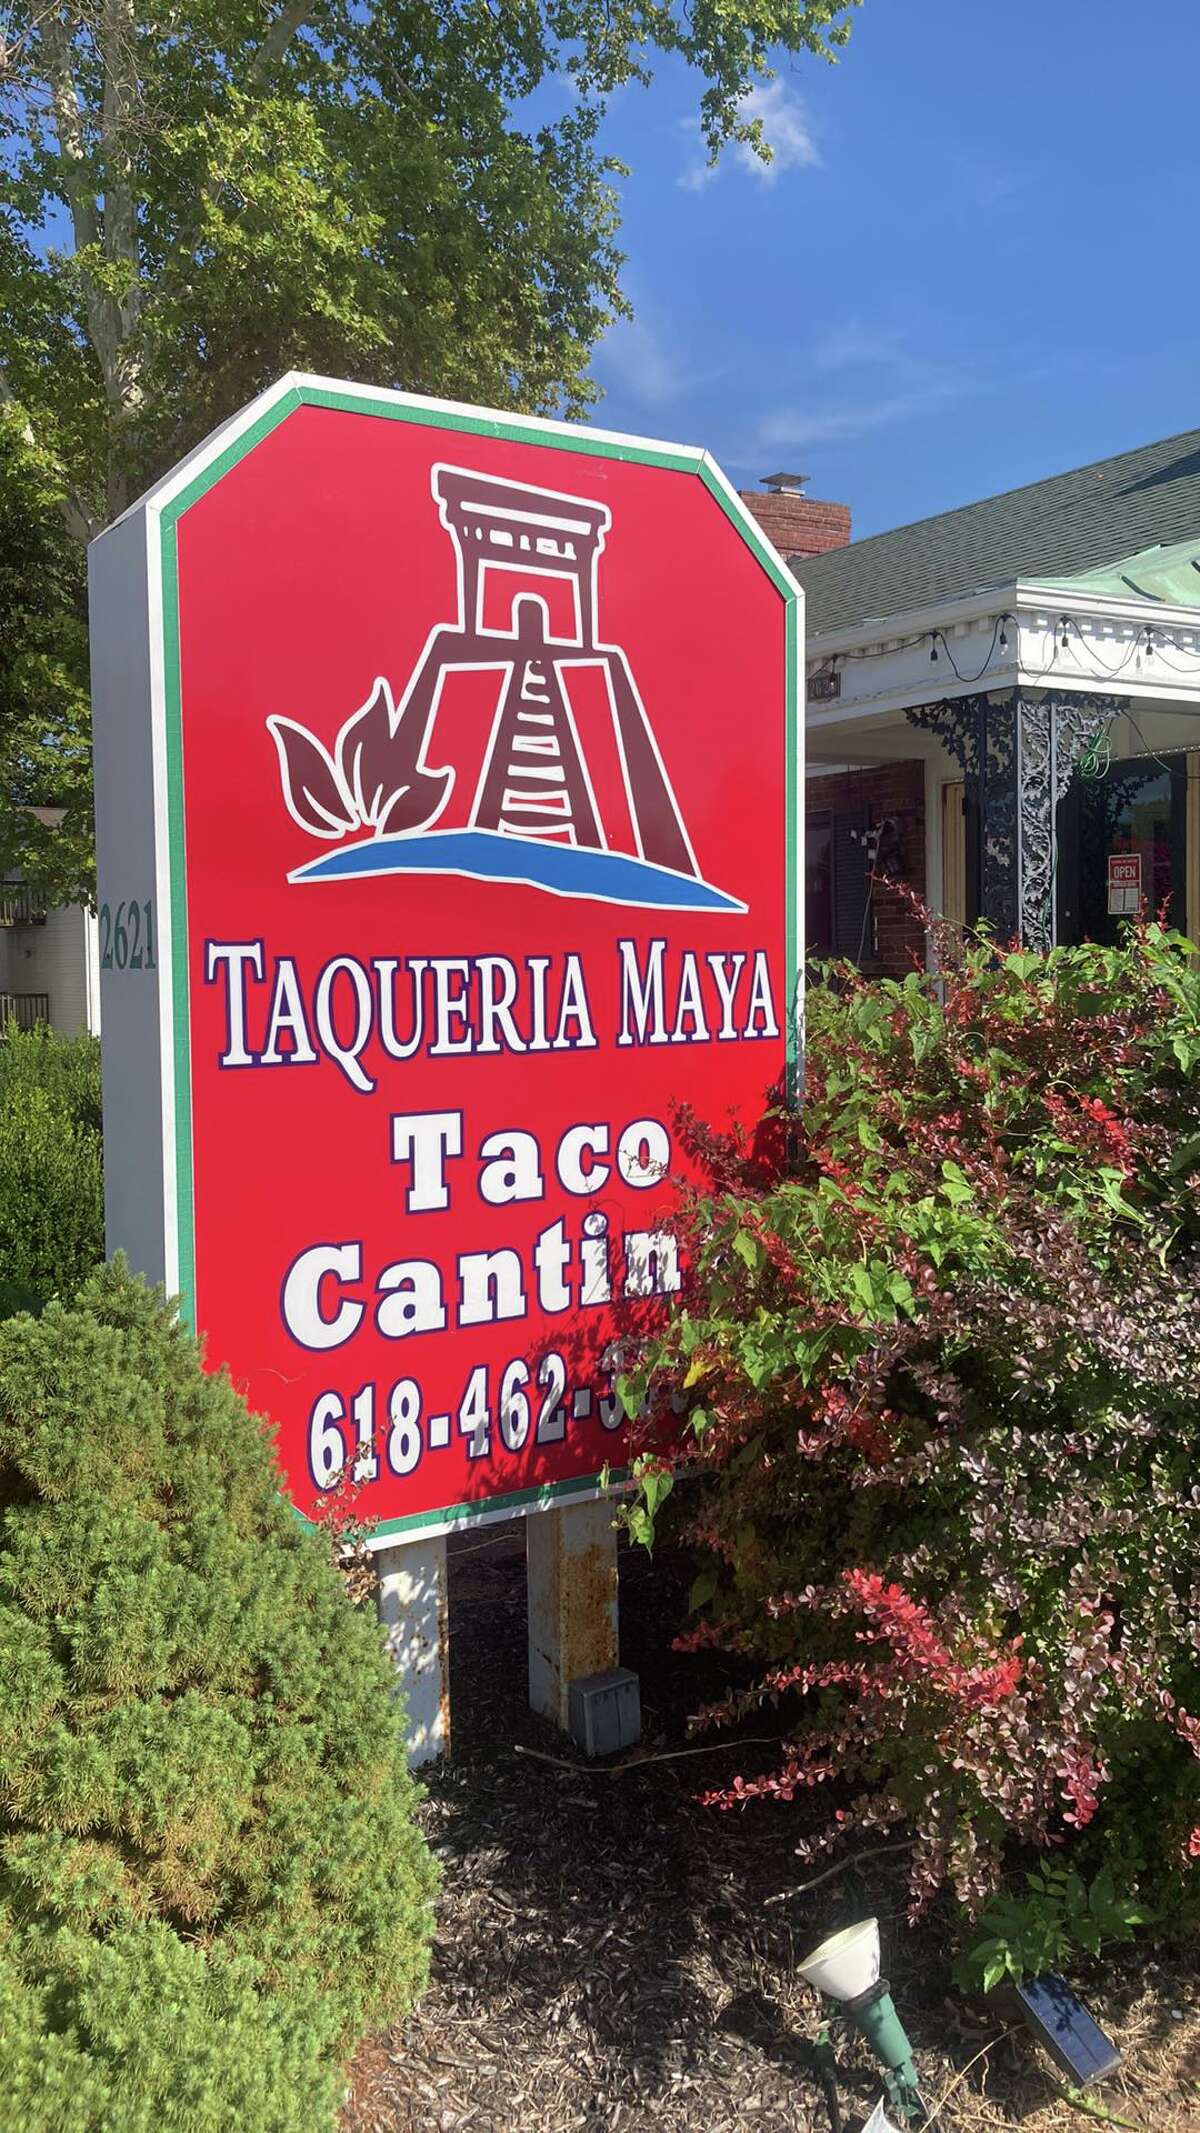 Taqueria Maya Taco Cantina is located at 2621 College Ave., in the former Dick's Flowers building, in Upper Alton. Taqueria Maya is owned and operated by general manager Luis Hernandez, who is associated with the family who owns Riviera Maya on Homer Adams Parkway.  Hernandez opened the cantina in February 2021.